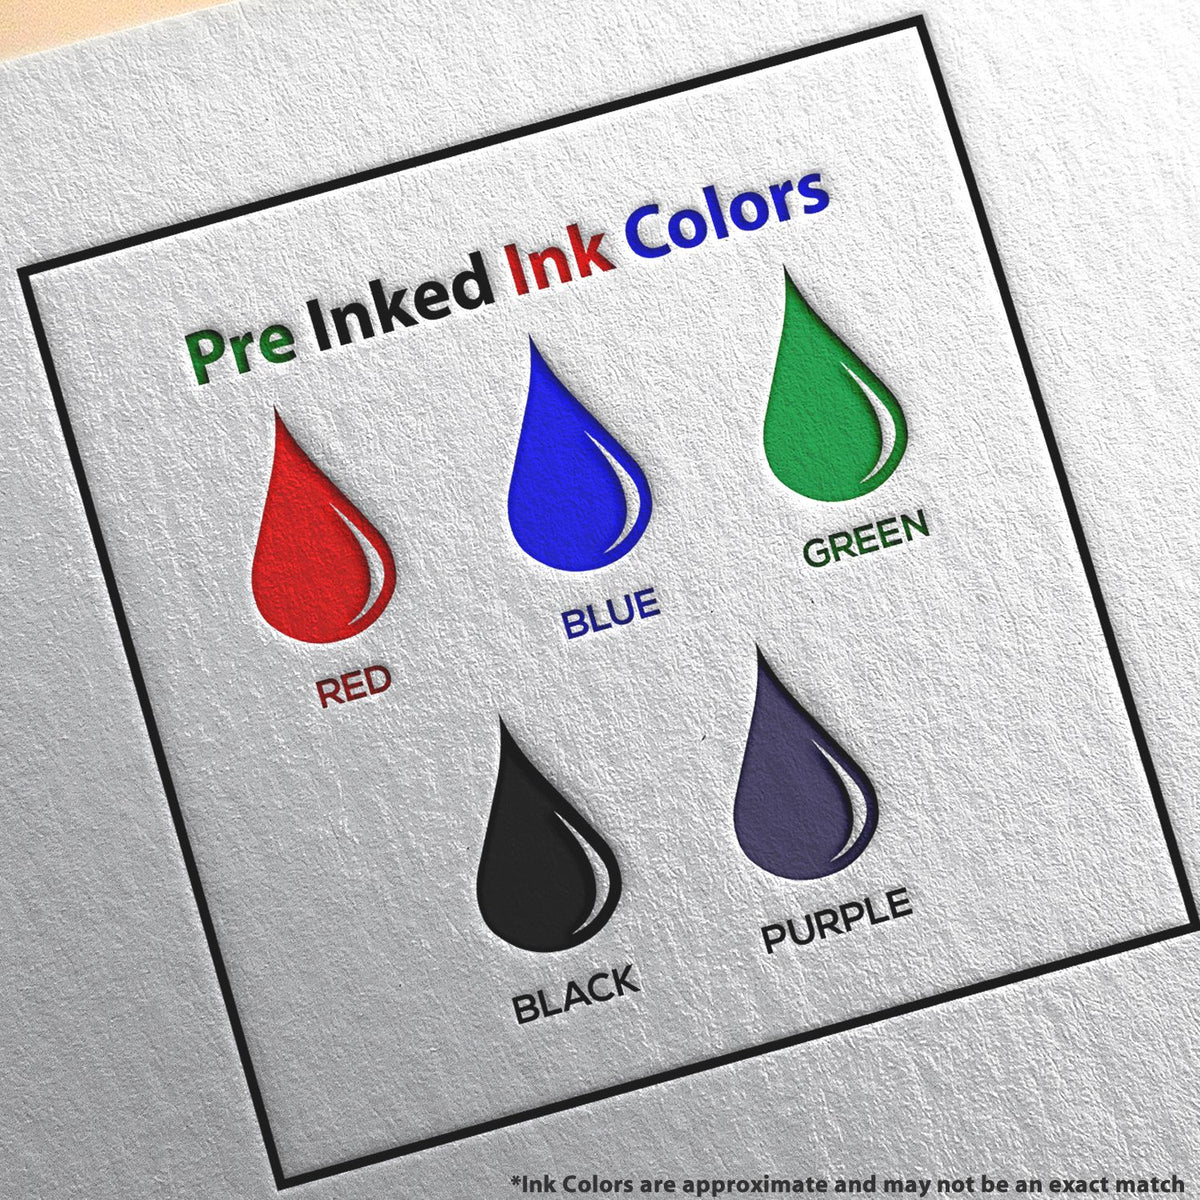 A picture showing the different ink colors or hues available for the Slim Pre-Inked Wisconsin Professional Engineer Seal Stamp product.